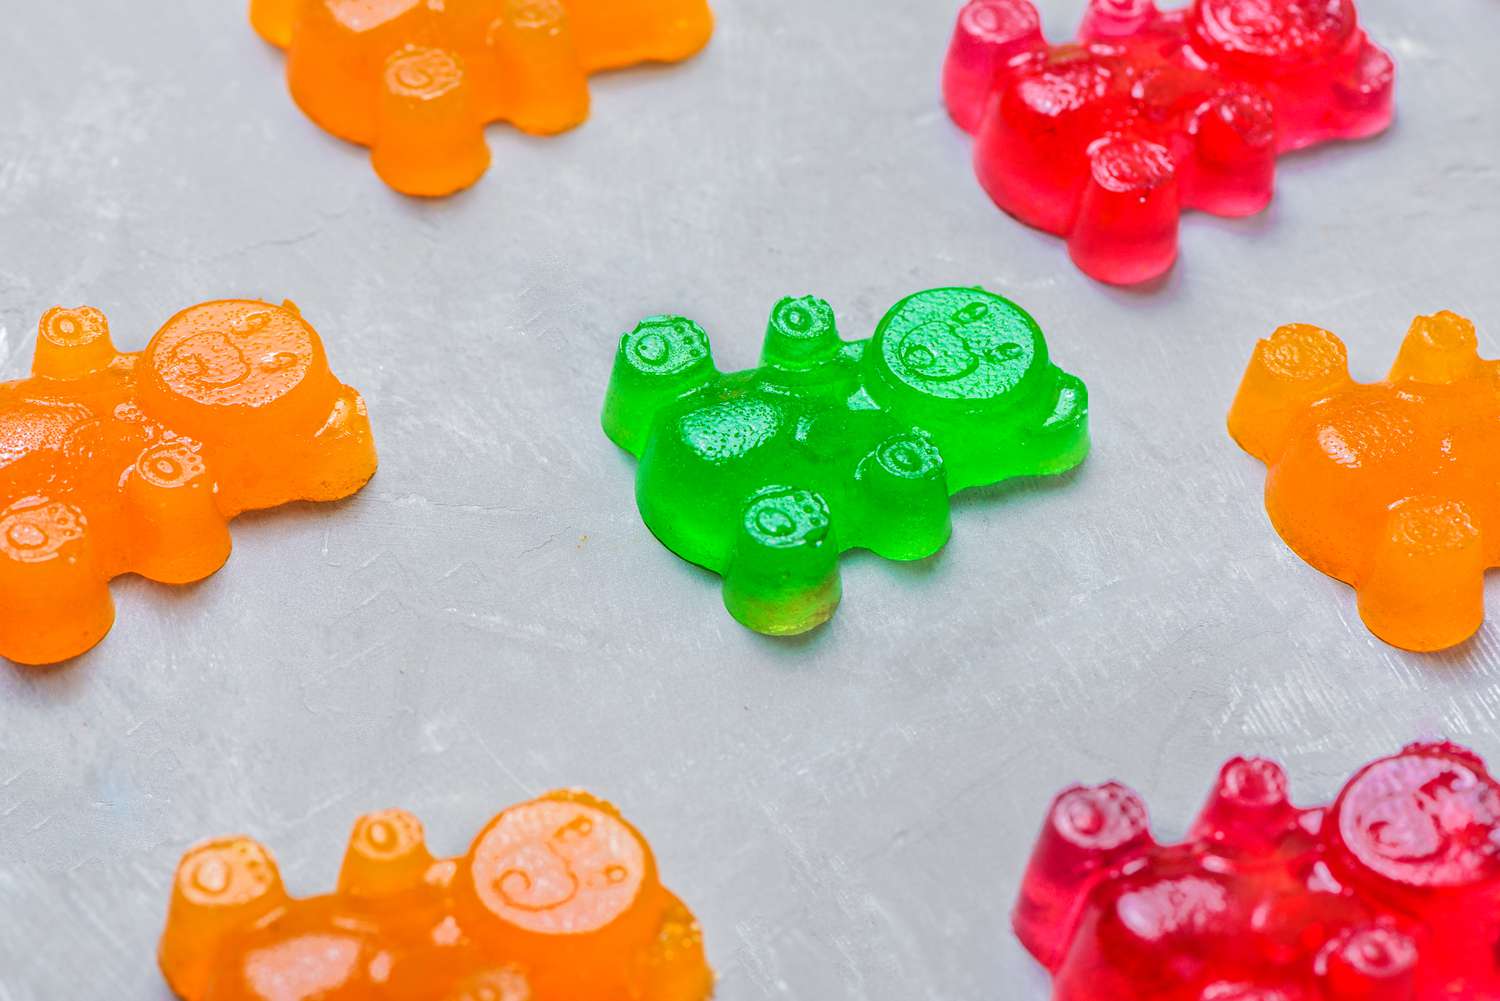 Shop now for pure live resin gummies